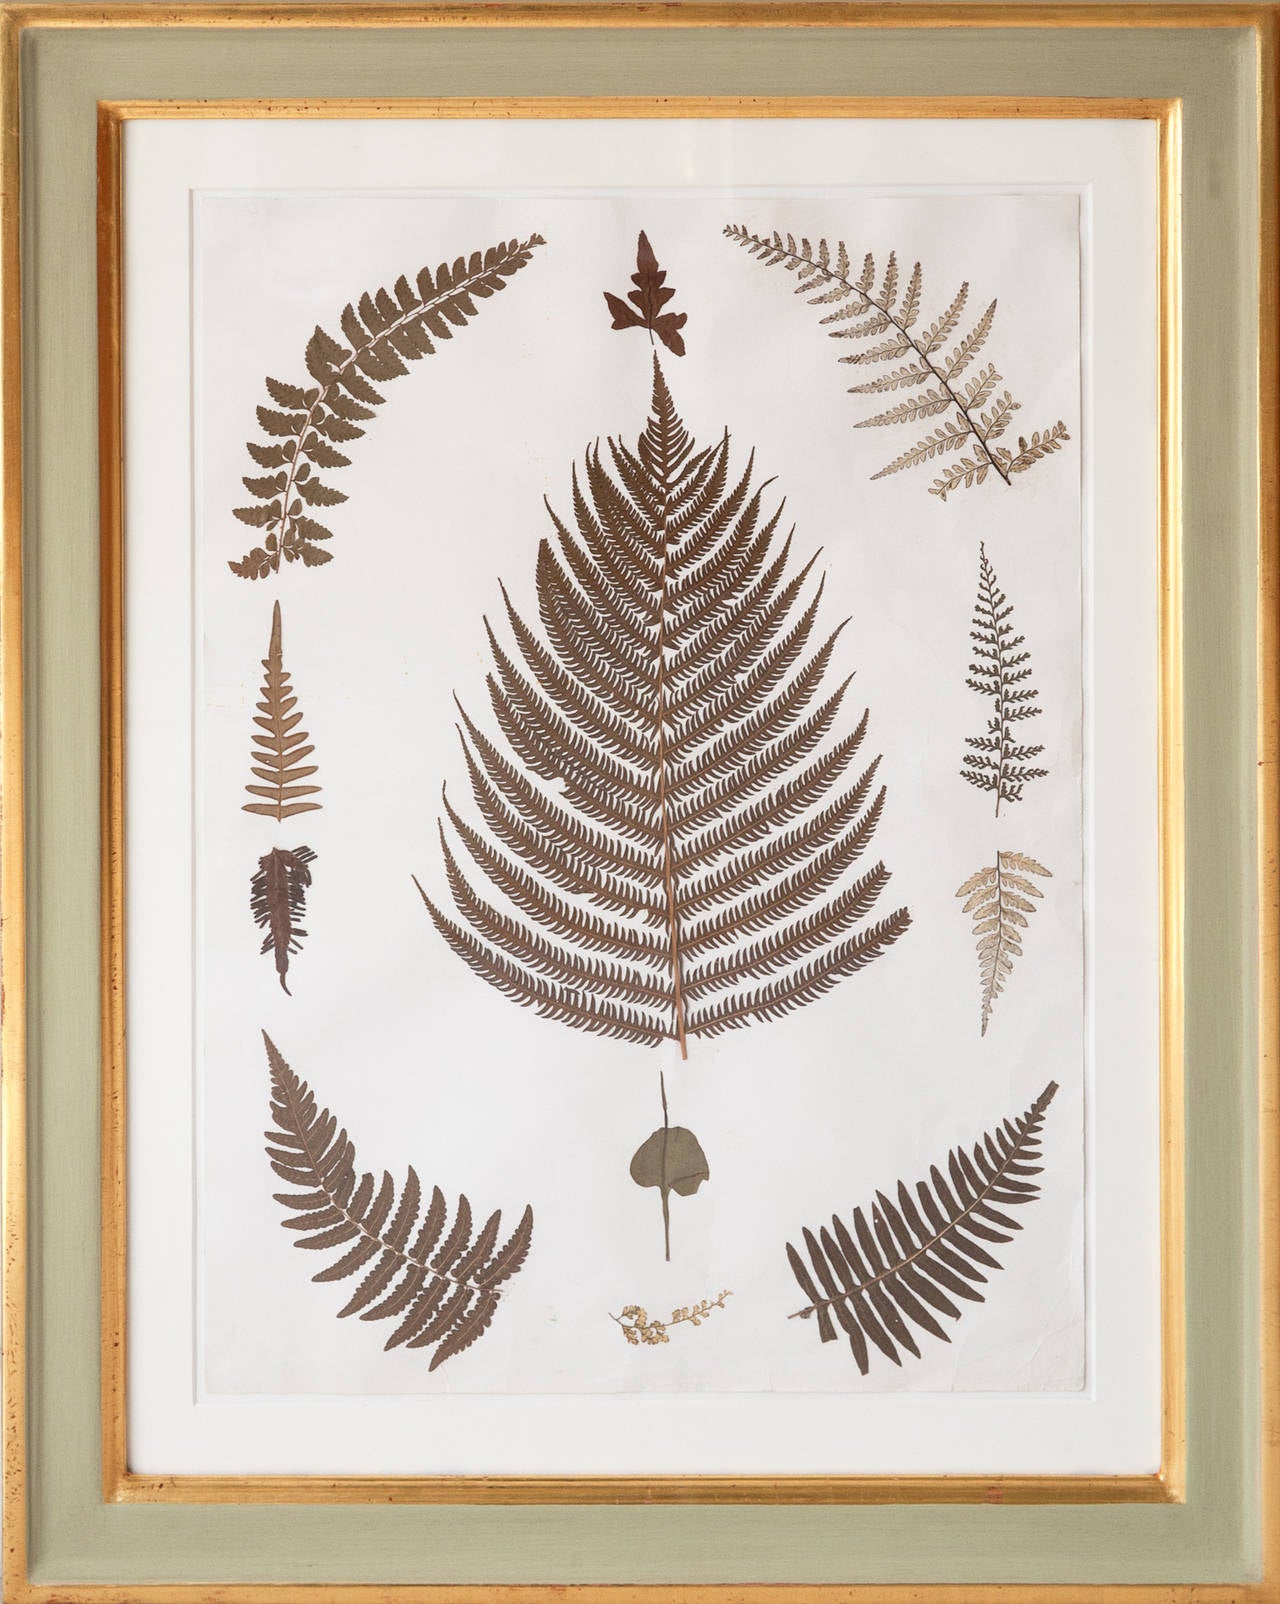 Set of nine 19th century framed pressed ferns from Jamiaica. Collected by Corporal W.H.Hurn, 1st Battalion 4th King's Own Royal, collected 1880.
Framed in handmade frames, with water gilding and painted in sage green, acid free mounts and